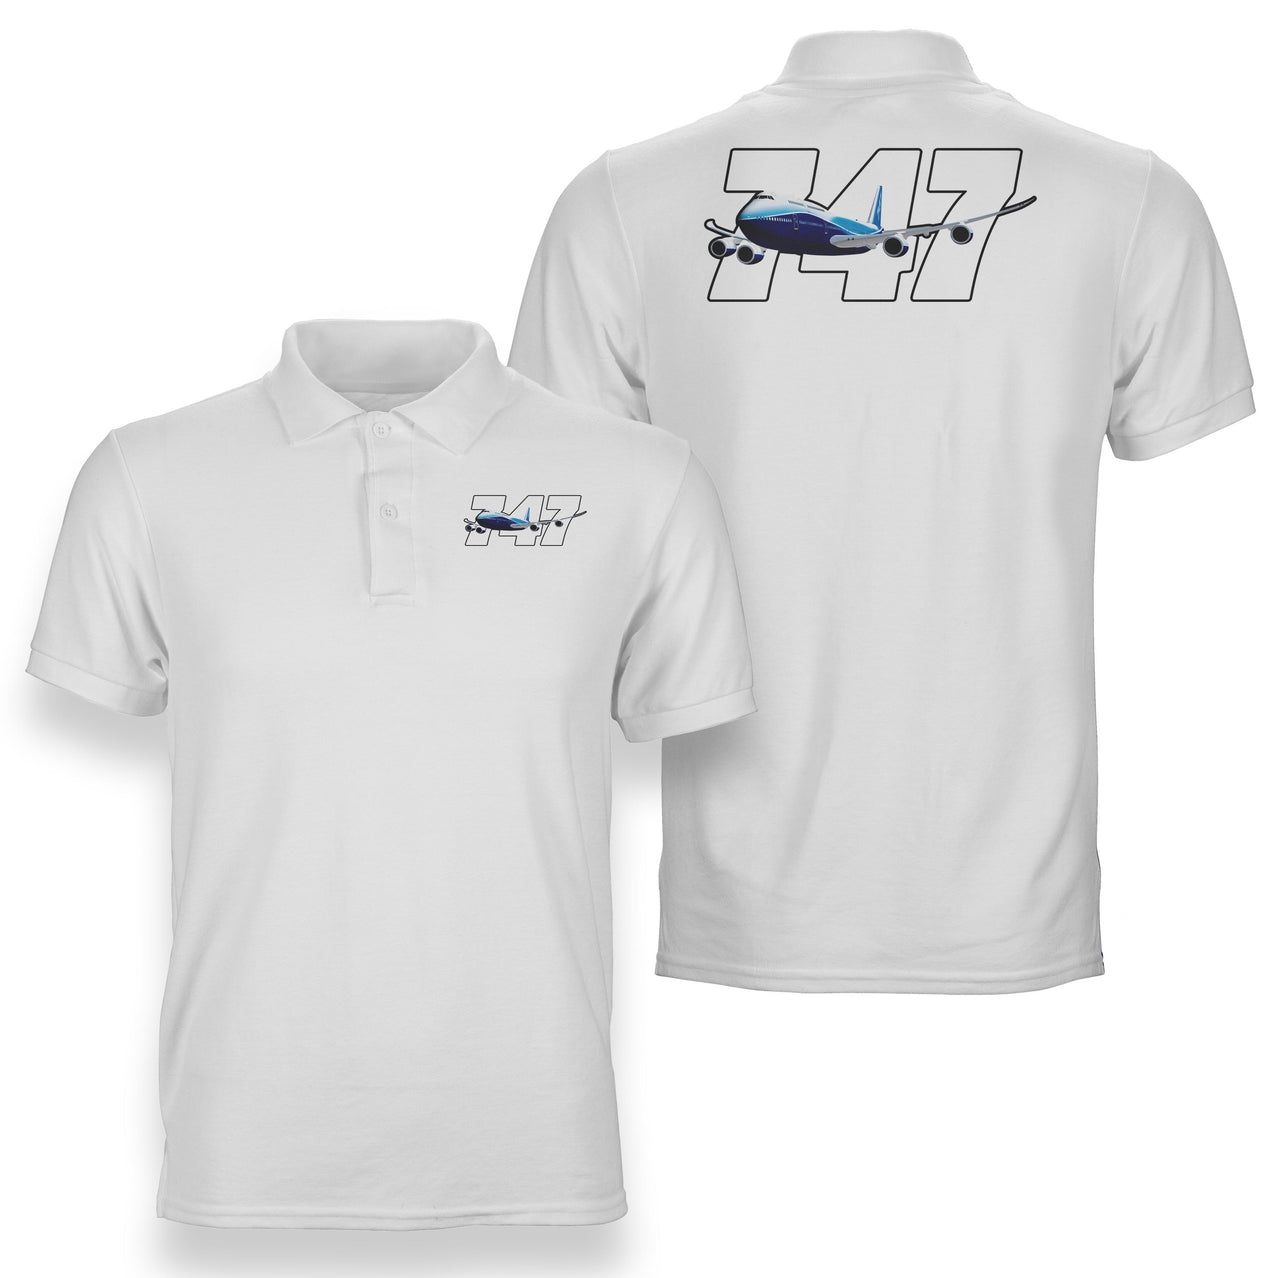 Super Boeing 747 Designed Double Side Polo T-Shirts